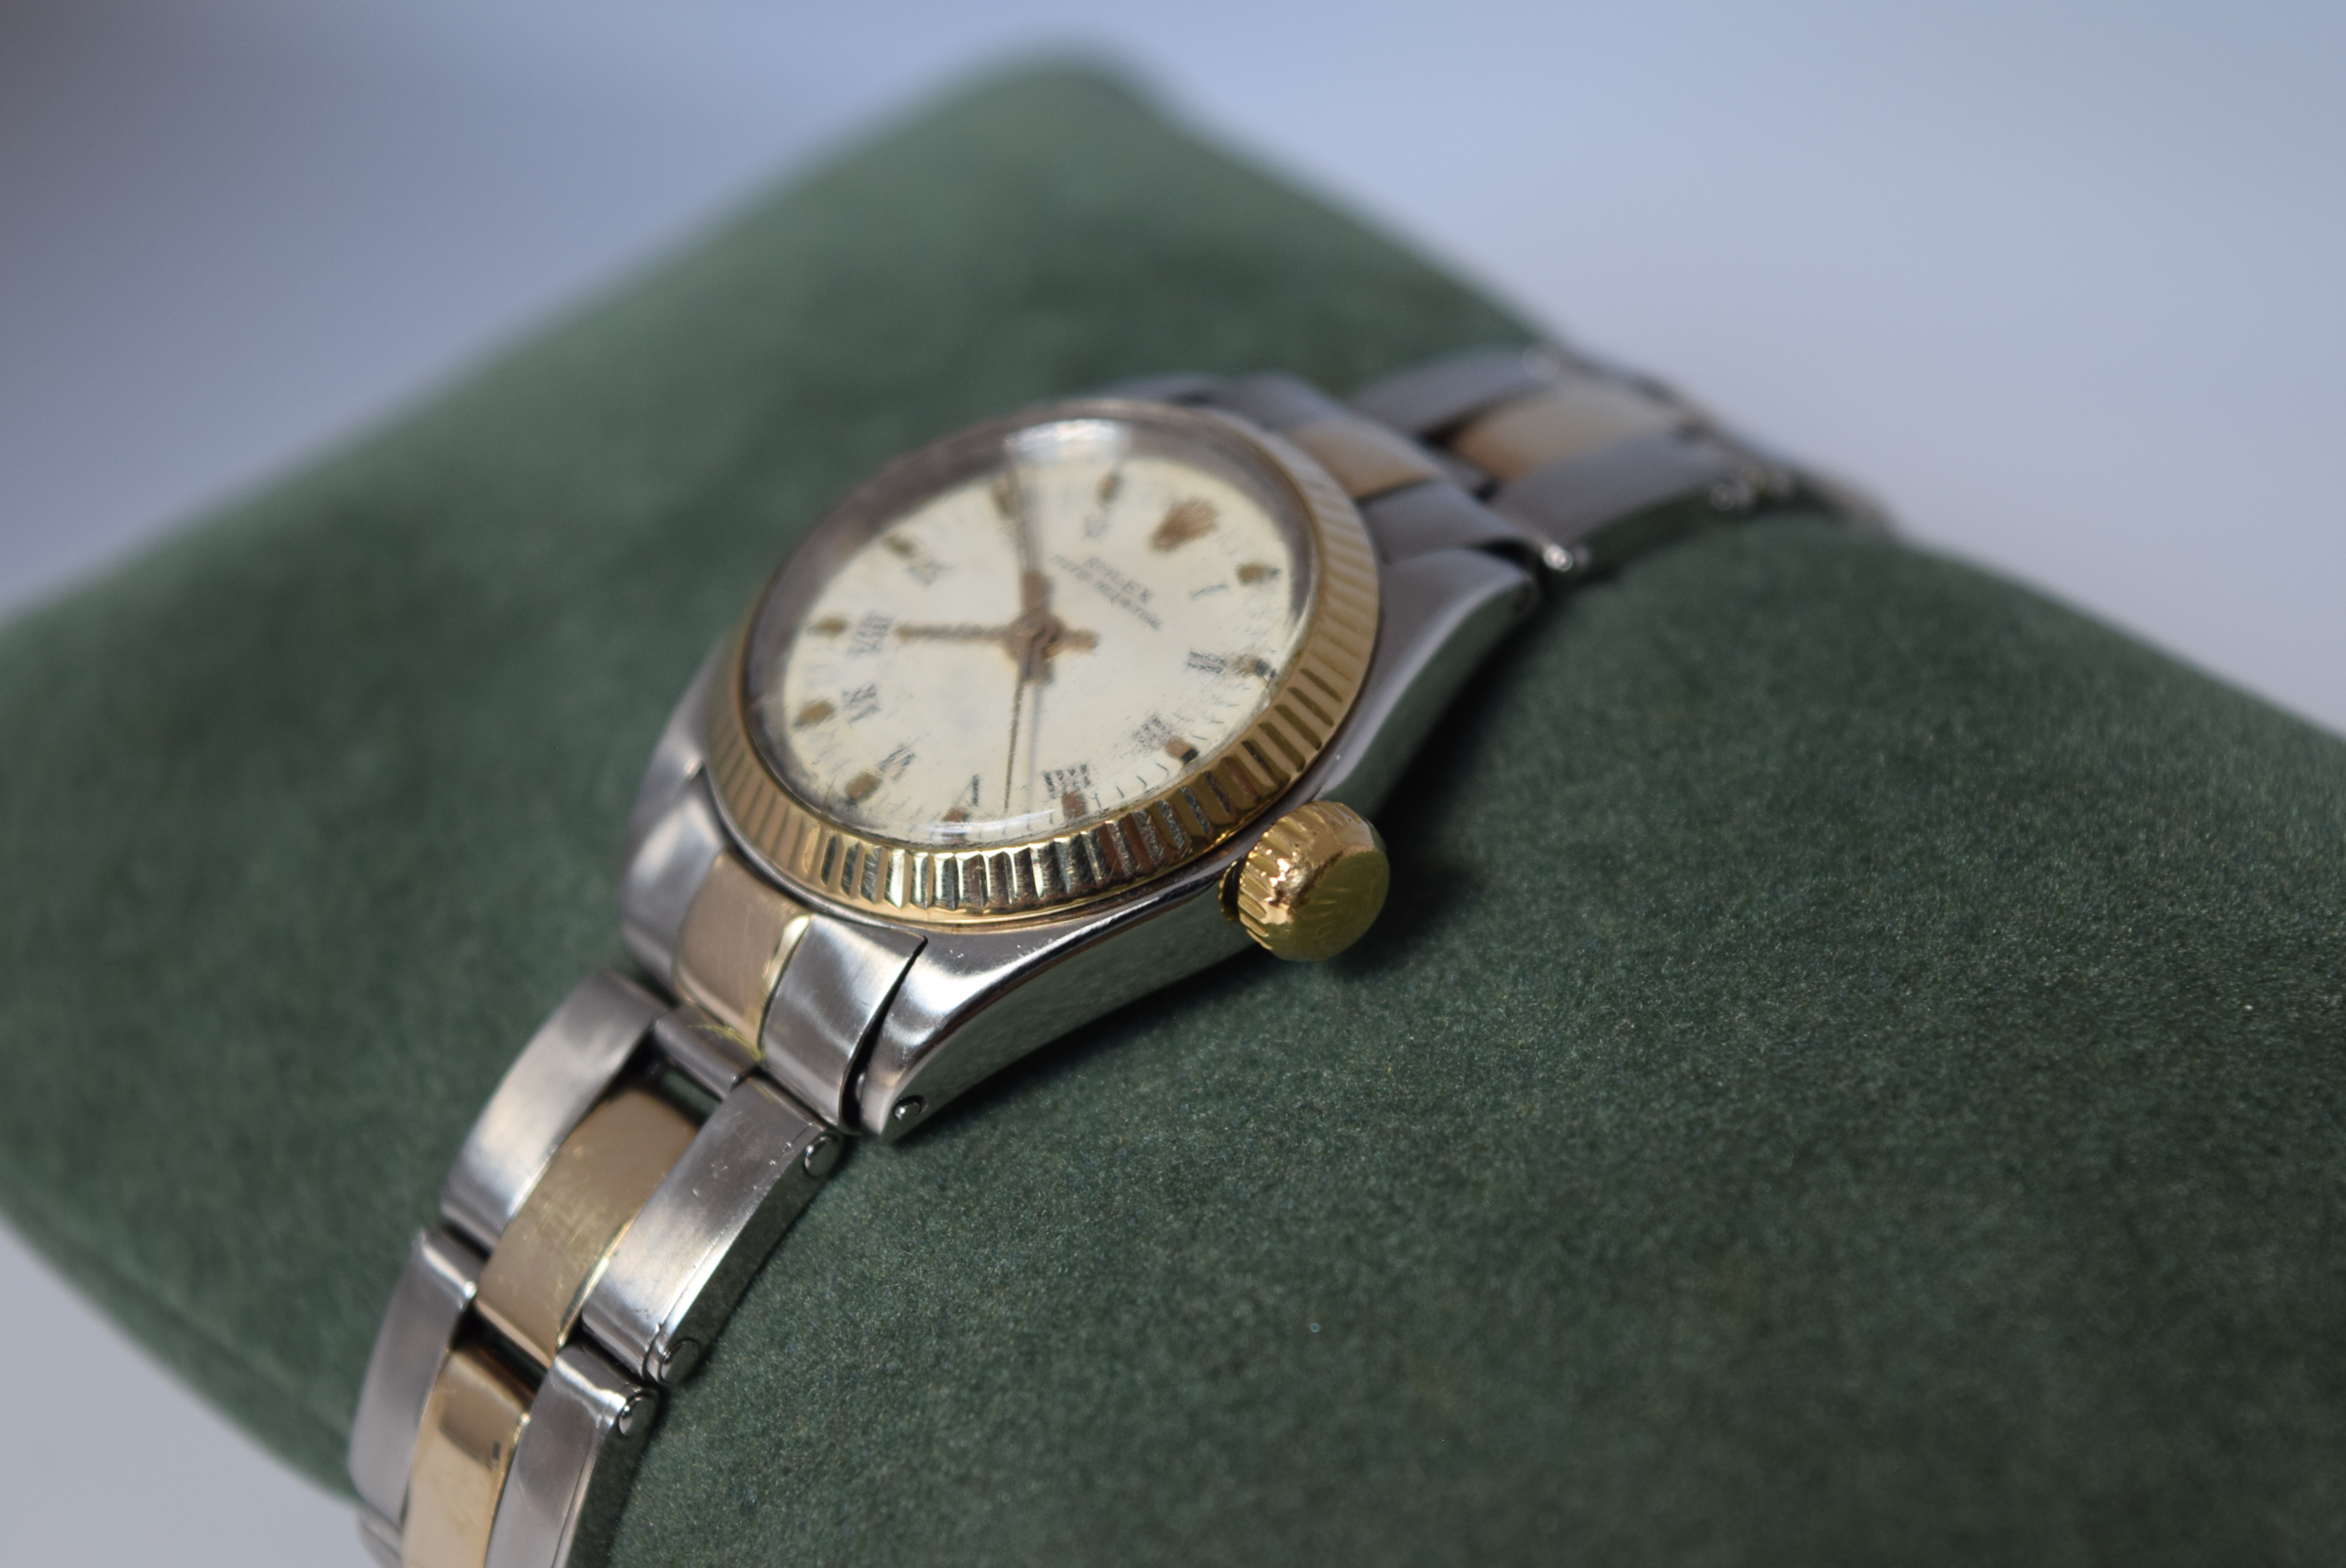 ROLEX OYSTER PERPETUAL LADIES WRIST WATCH IN STEEL AND GOLD - Image 4 of 4